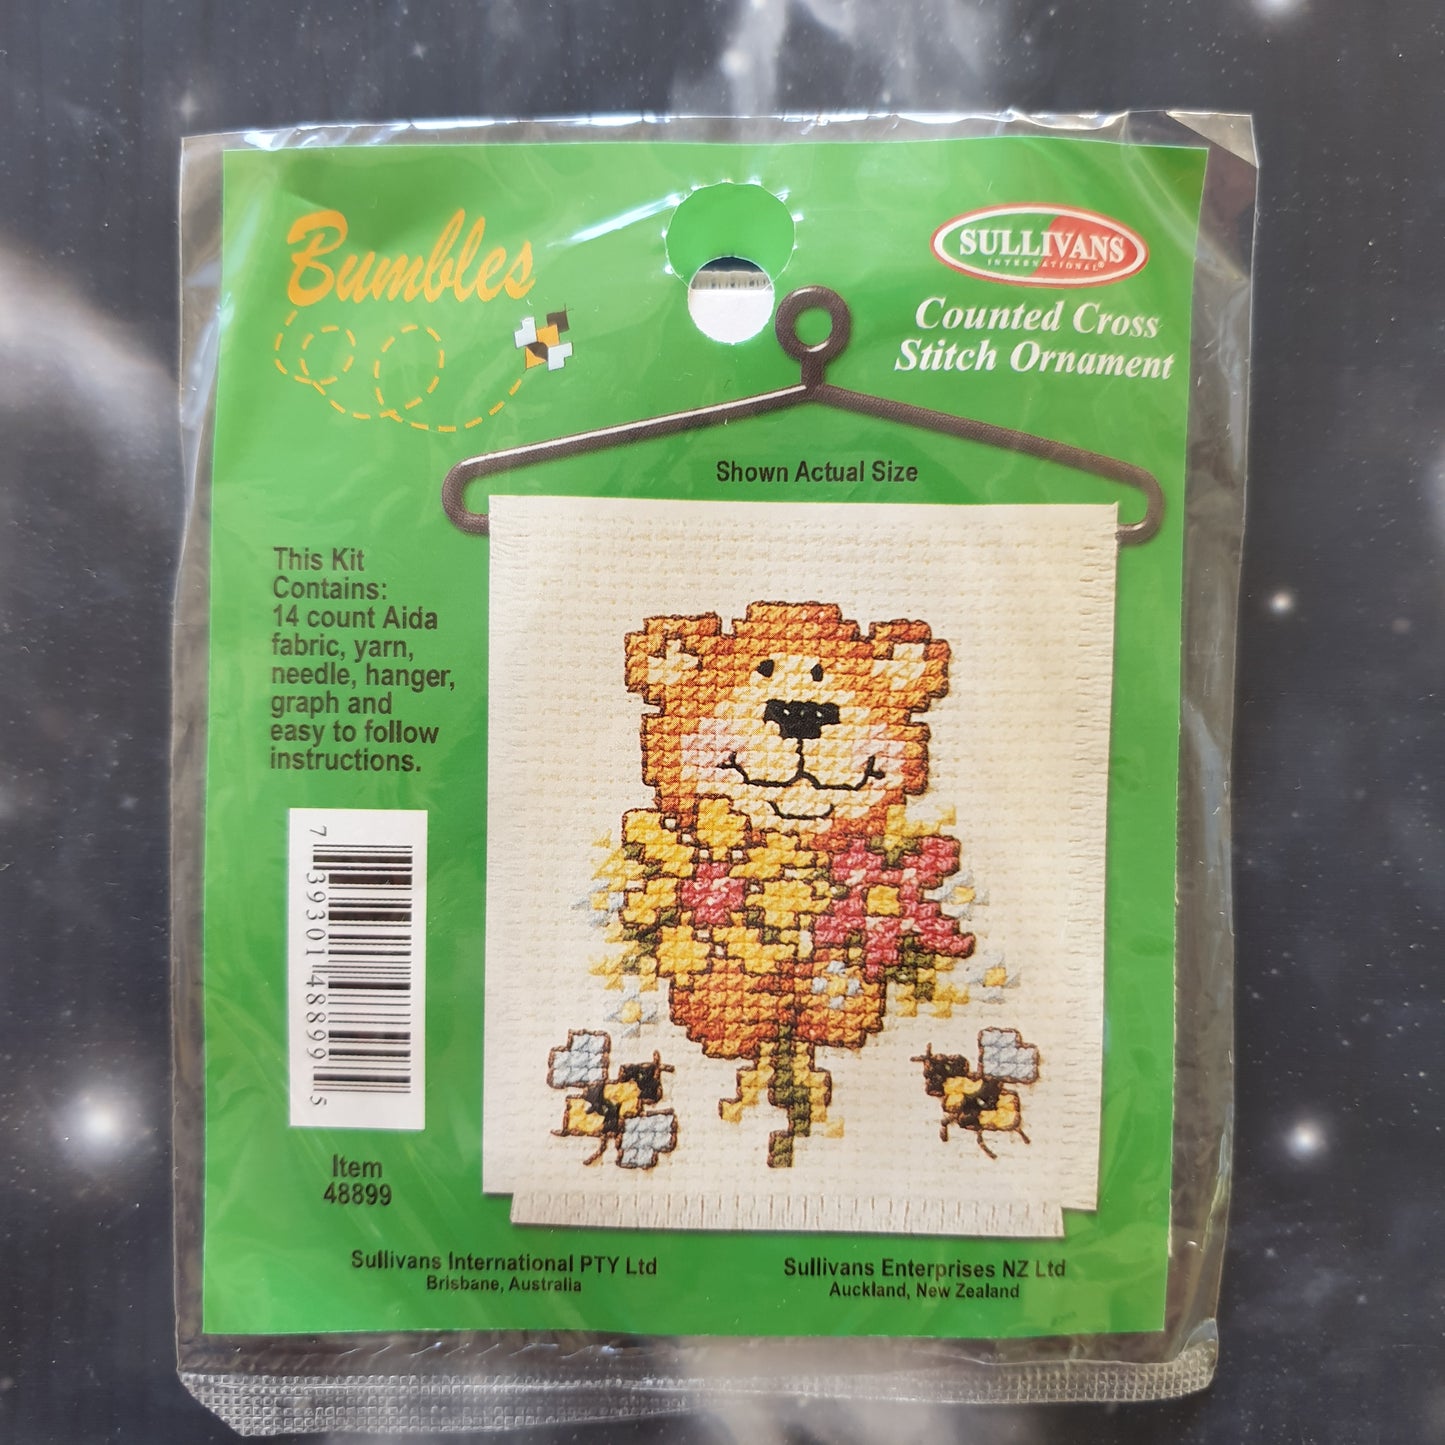 Bear with Flowers & Bees Counted Cross Stitch Ornament Kit